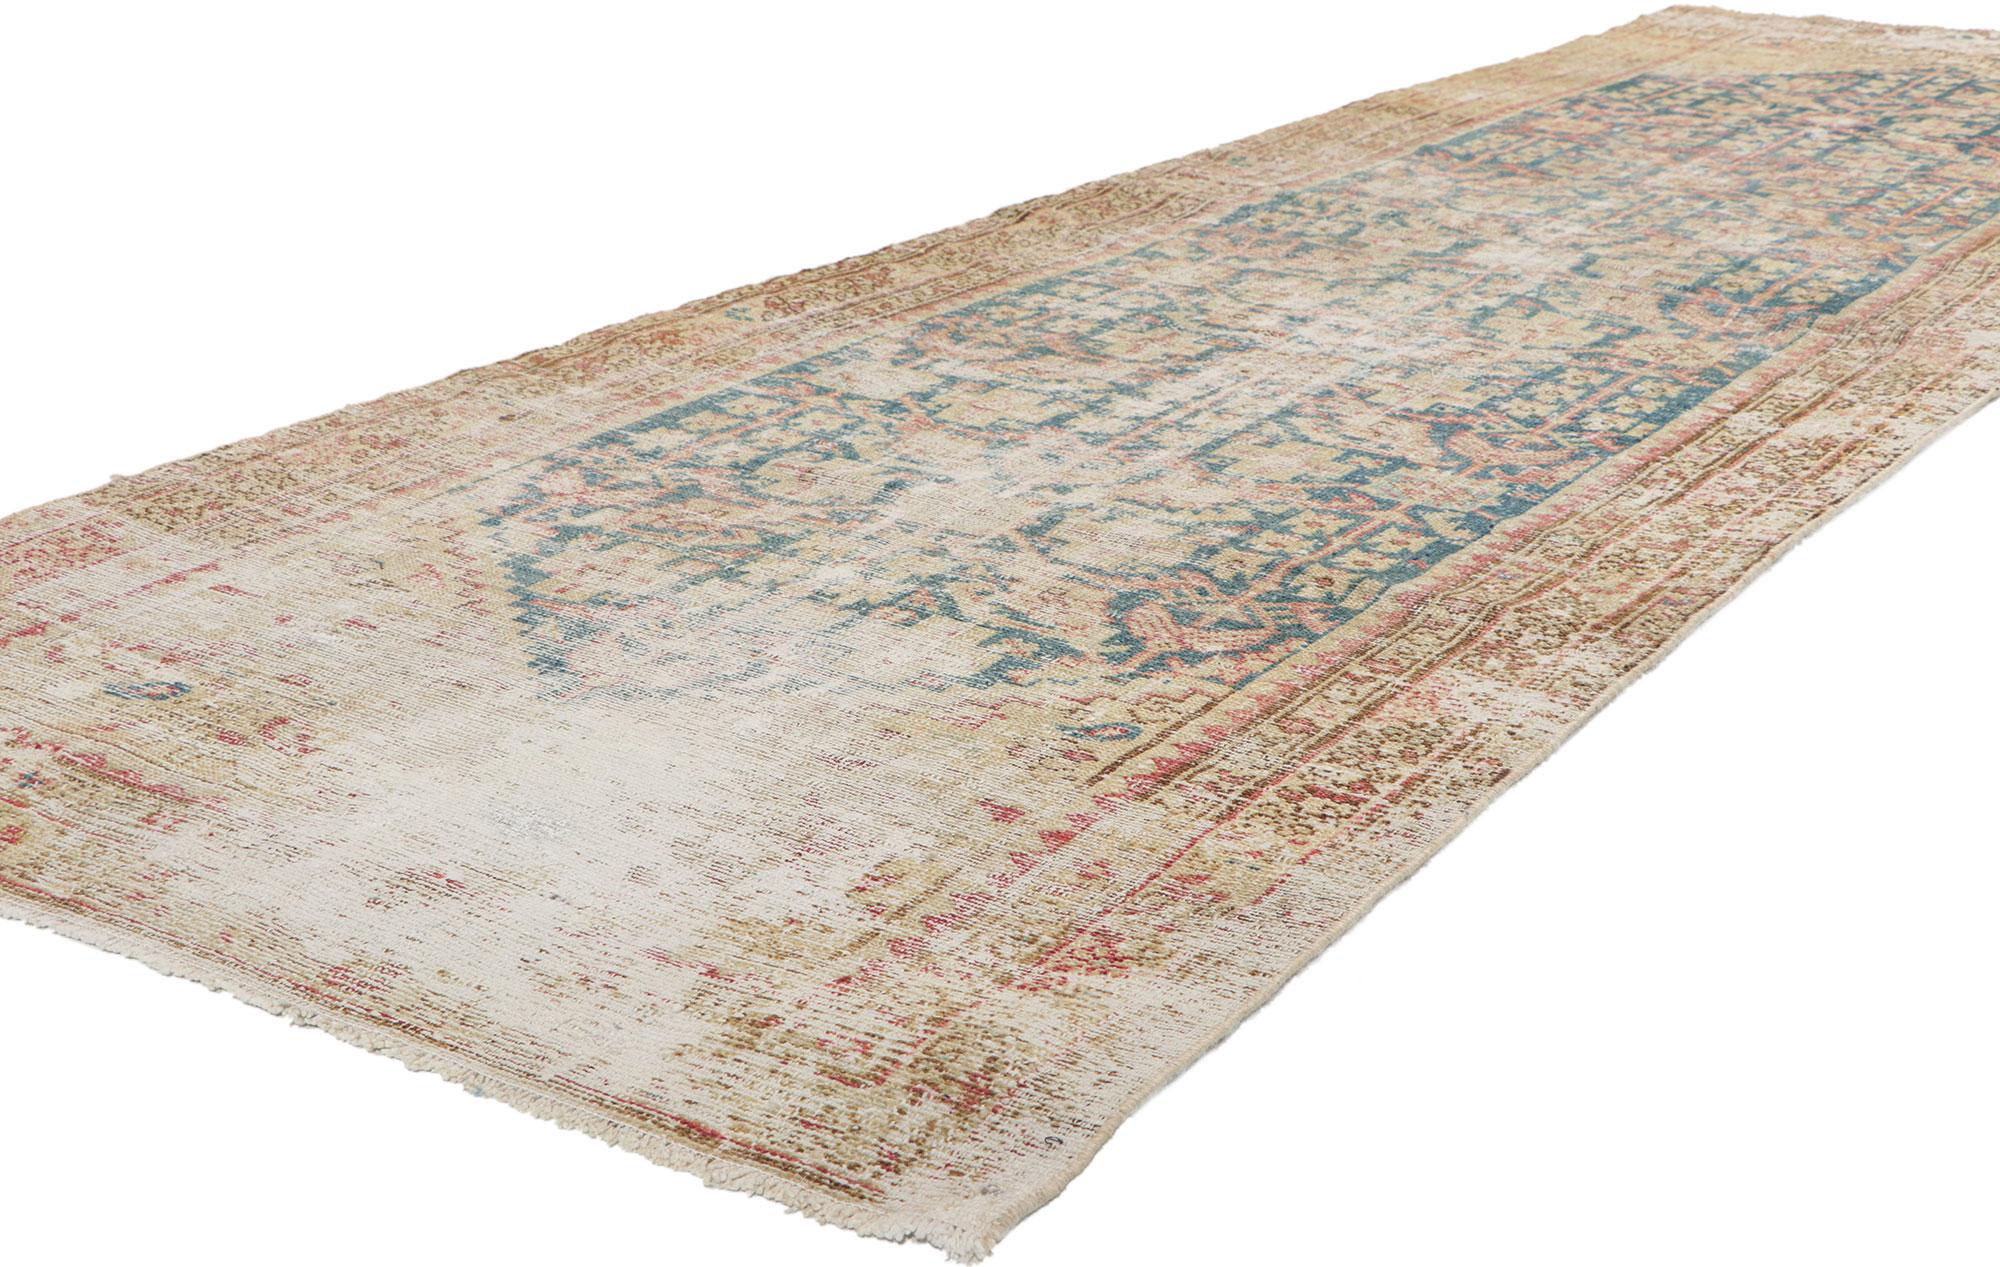 61135 Antique Persian Malayer runner, 03'04 x 11'02.
With its rugged beauty and rustic sensibility, this hand knotted wool distressed antique Persian Malayer runner will take on a curated lived-in look that feels timeless while imparting a sense of